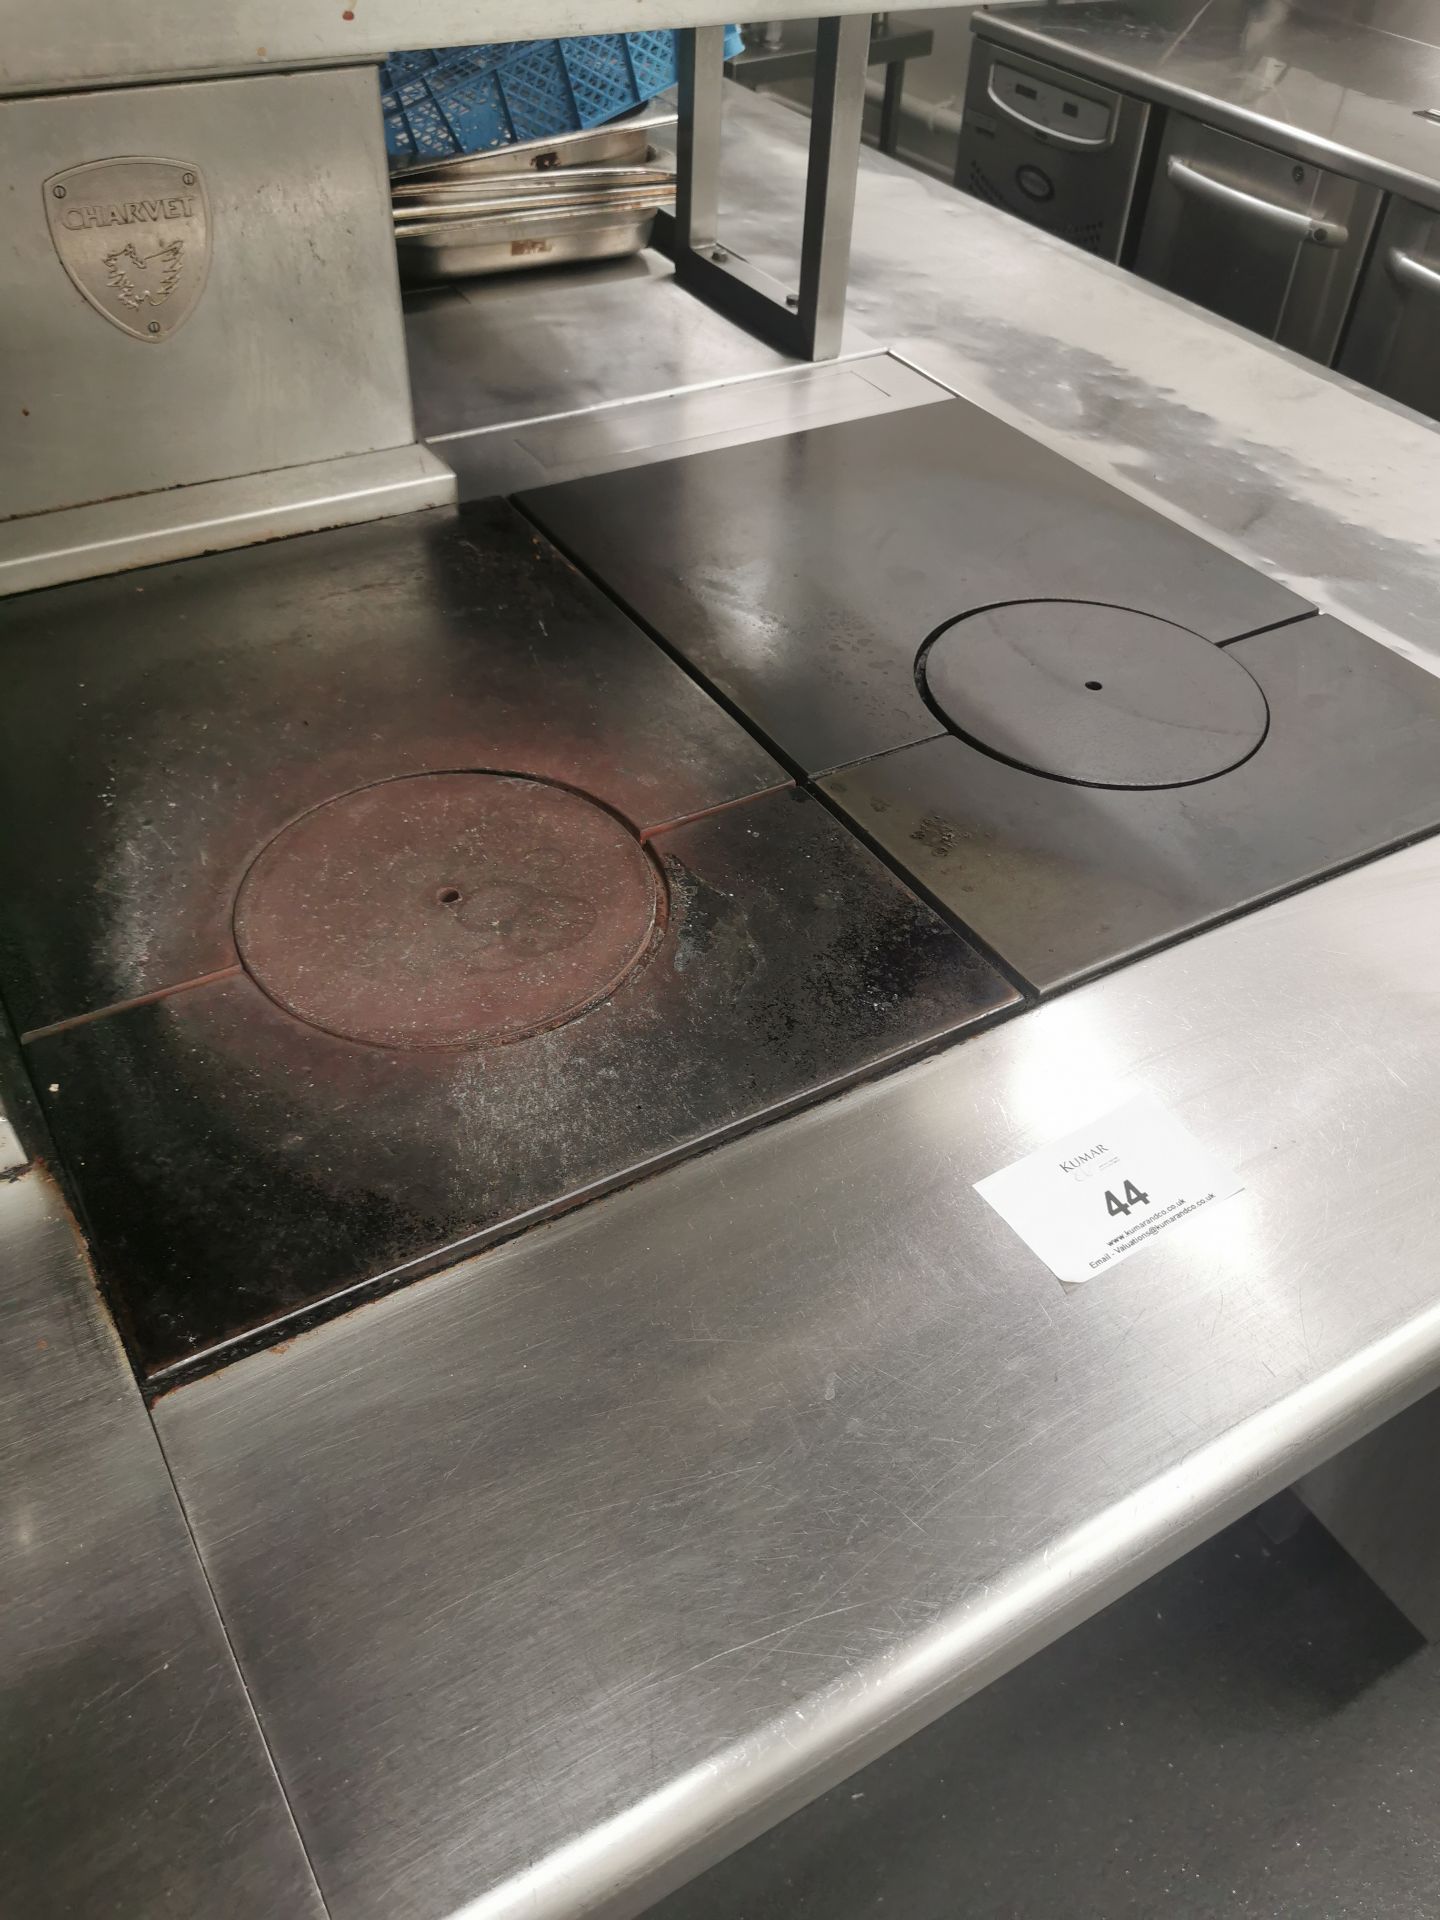 Charvet pro series twin hot plates and oven W85cm - Image 5 of 5